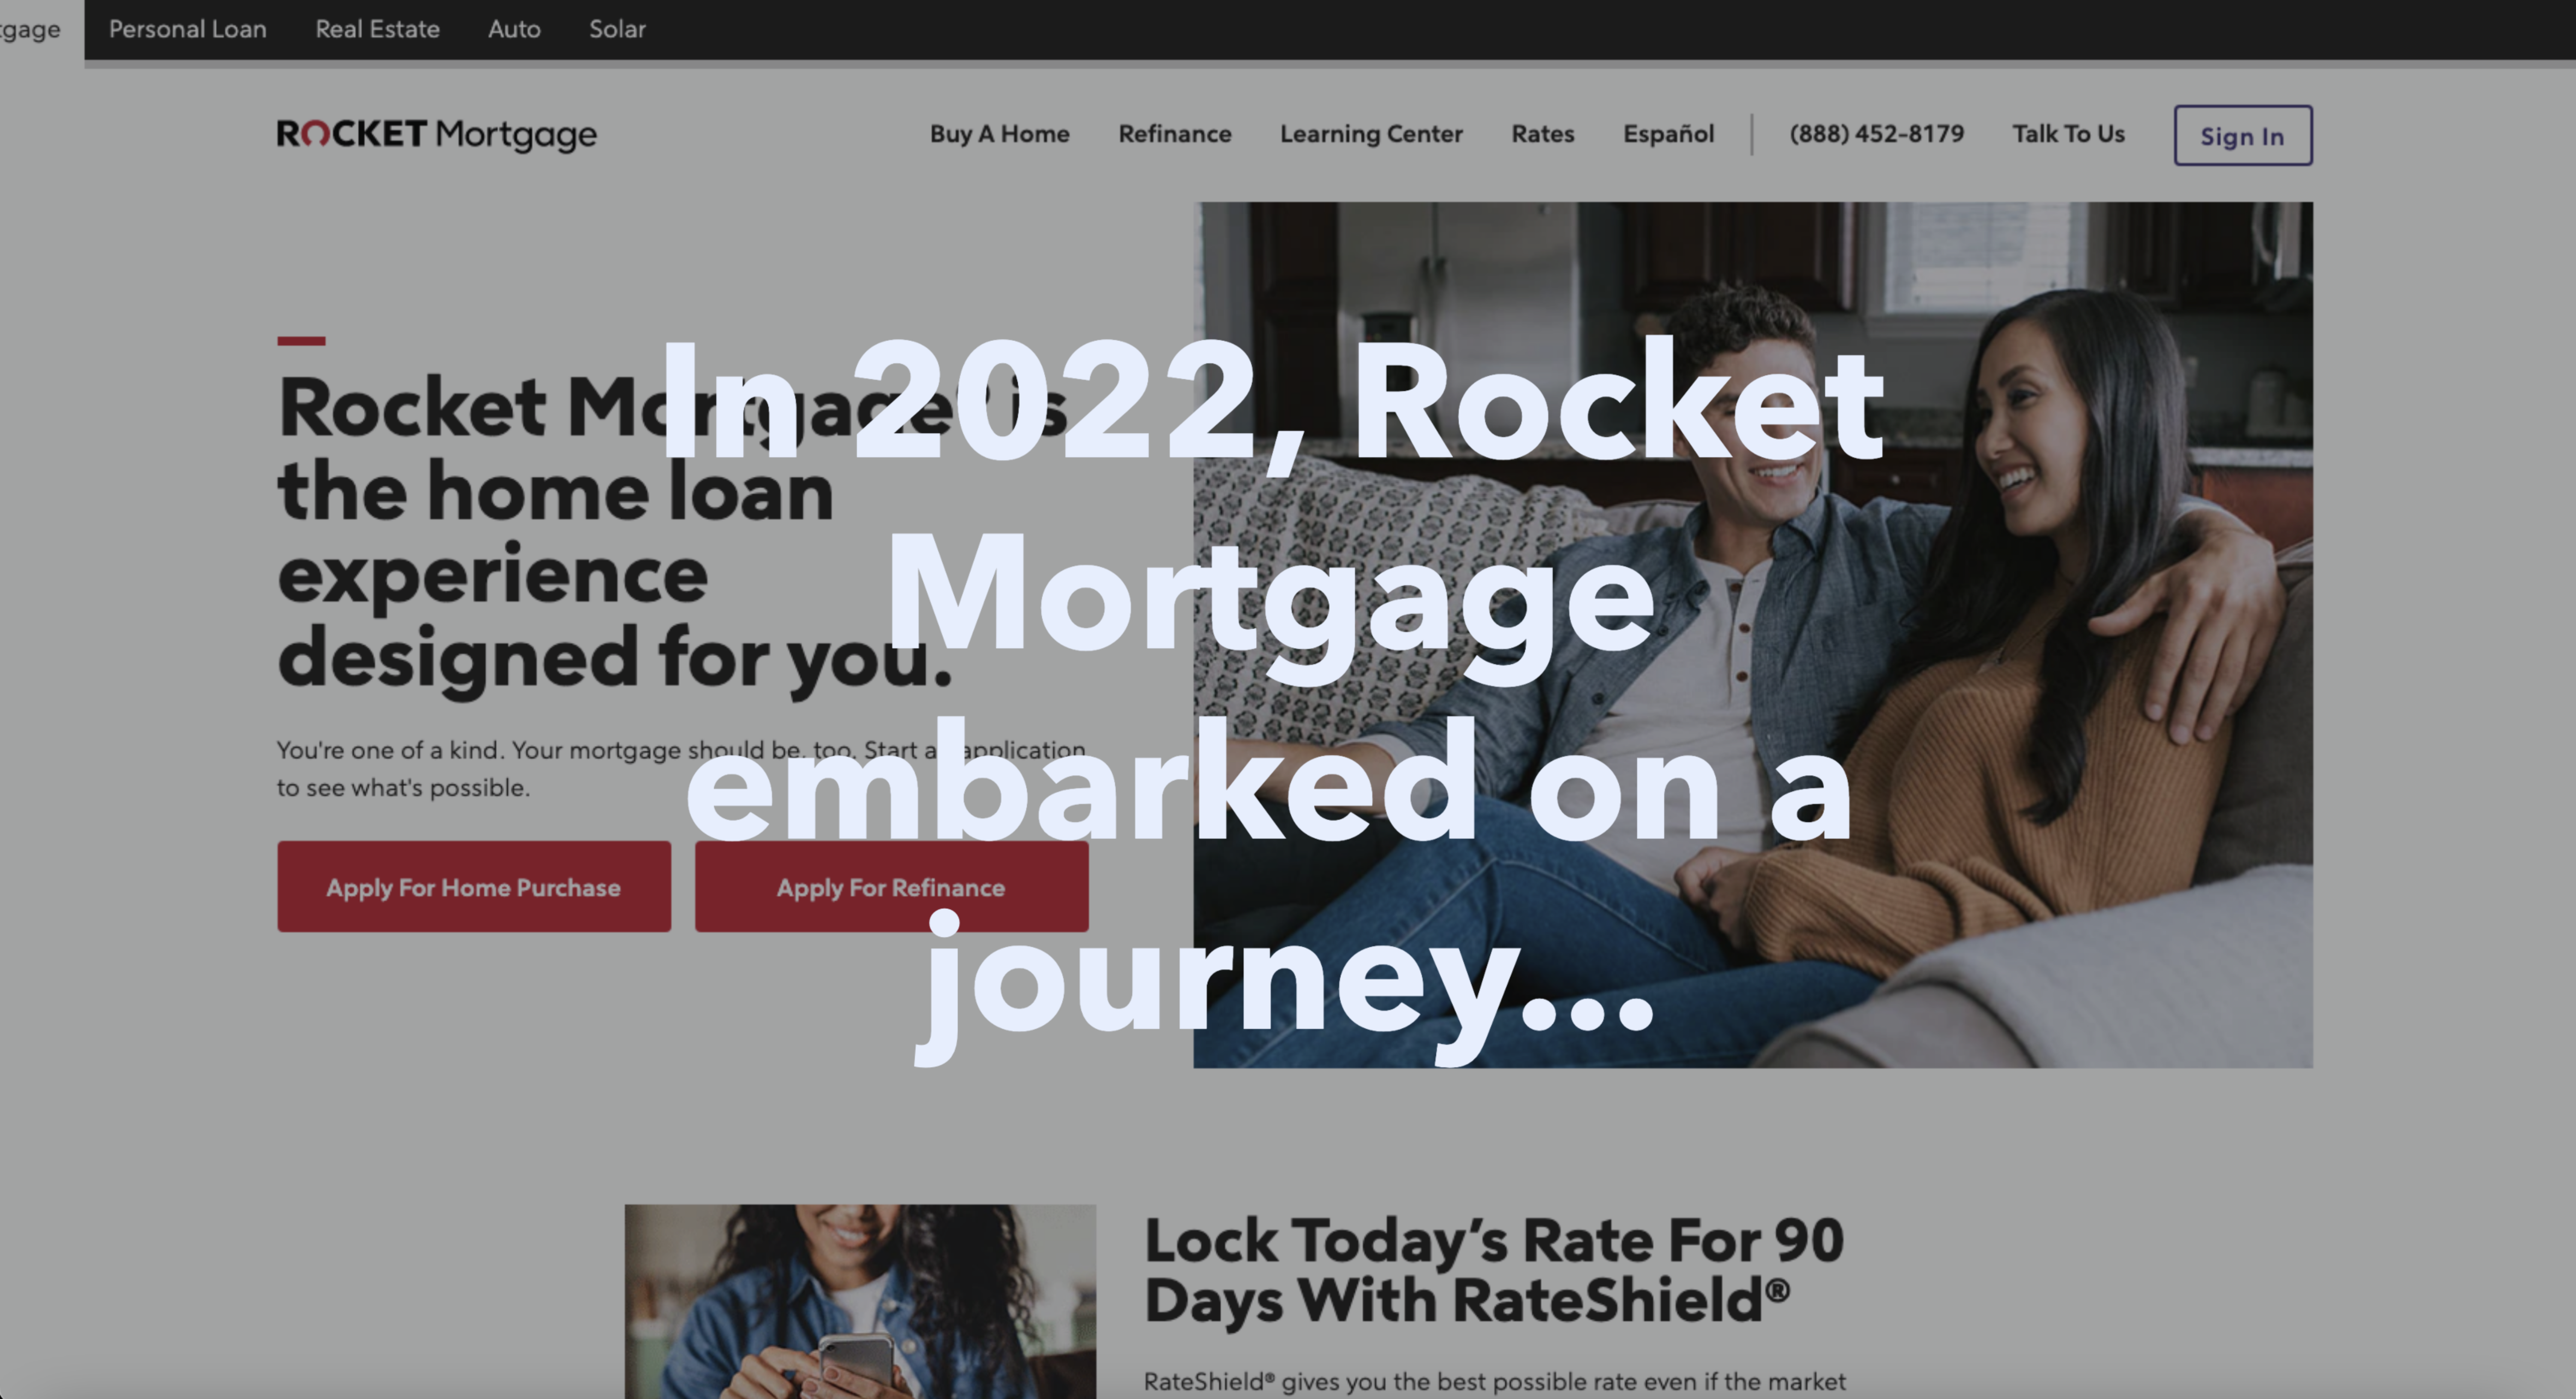 context and setting for the rocket mortgage personas